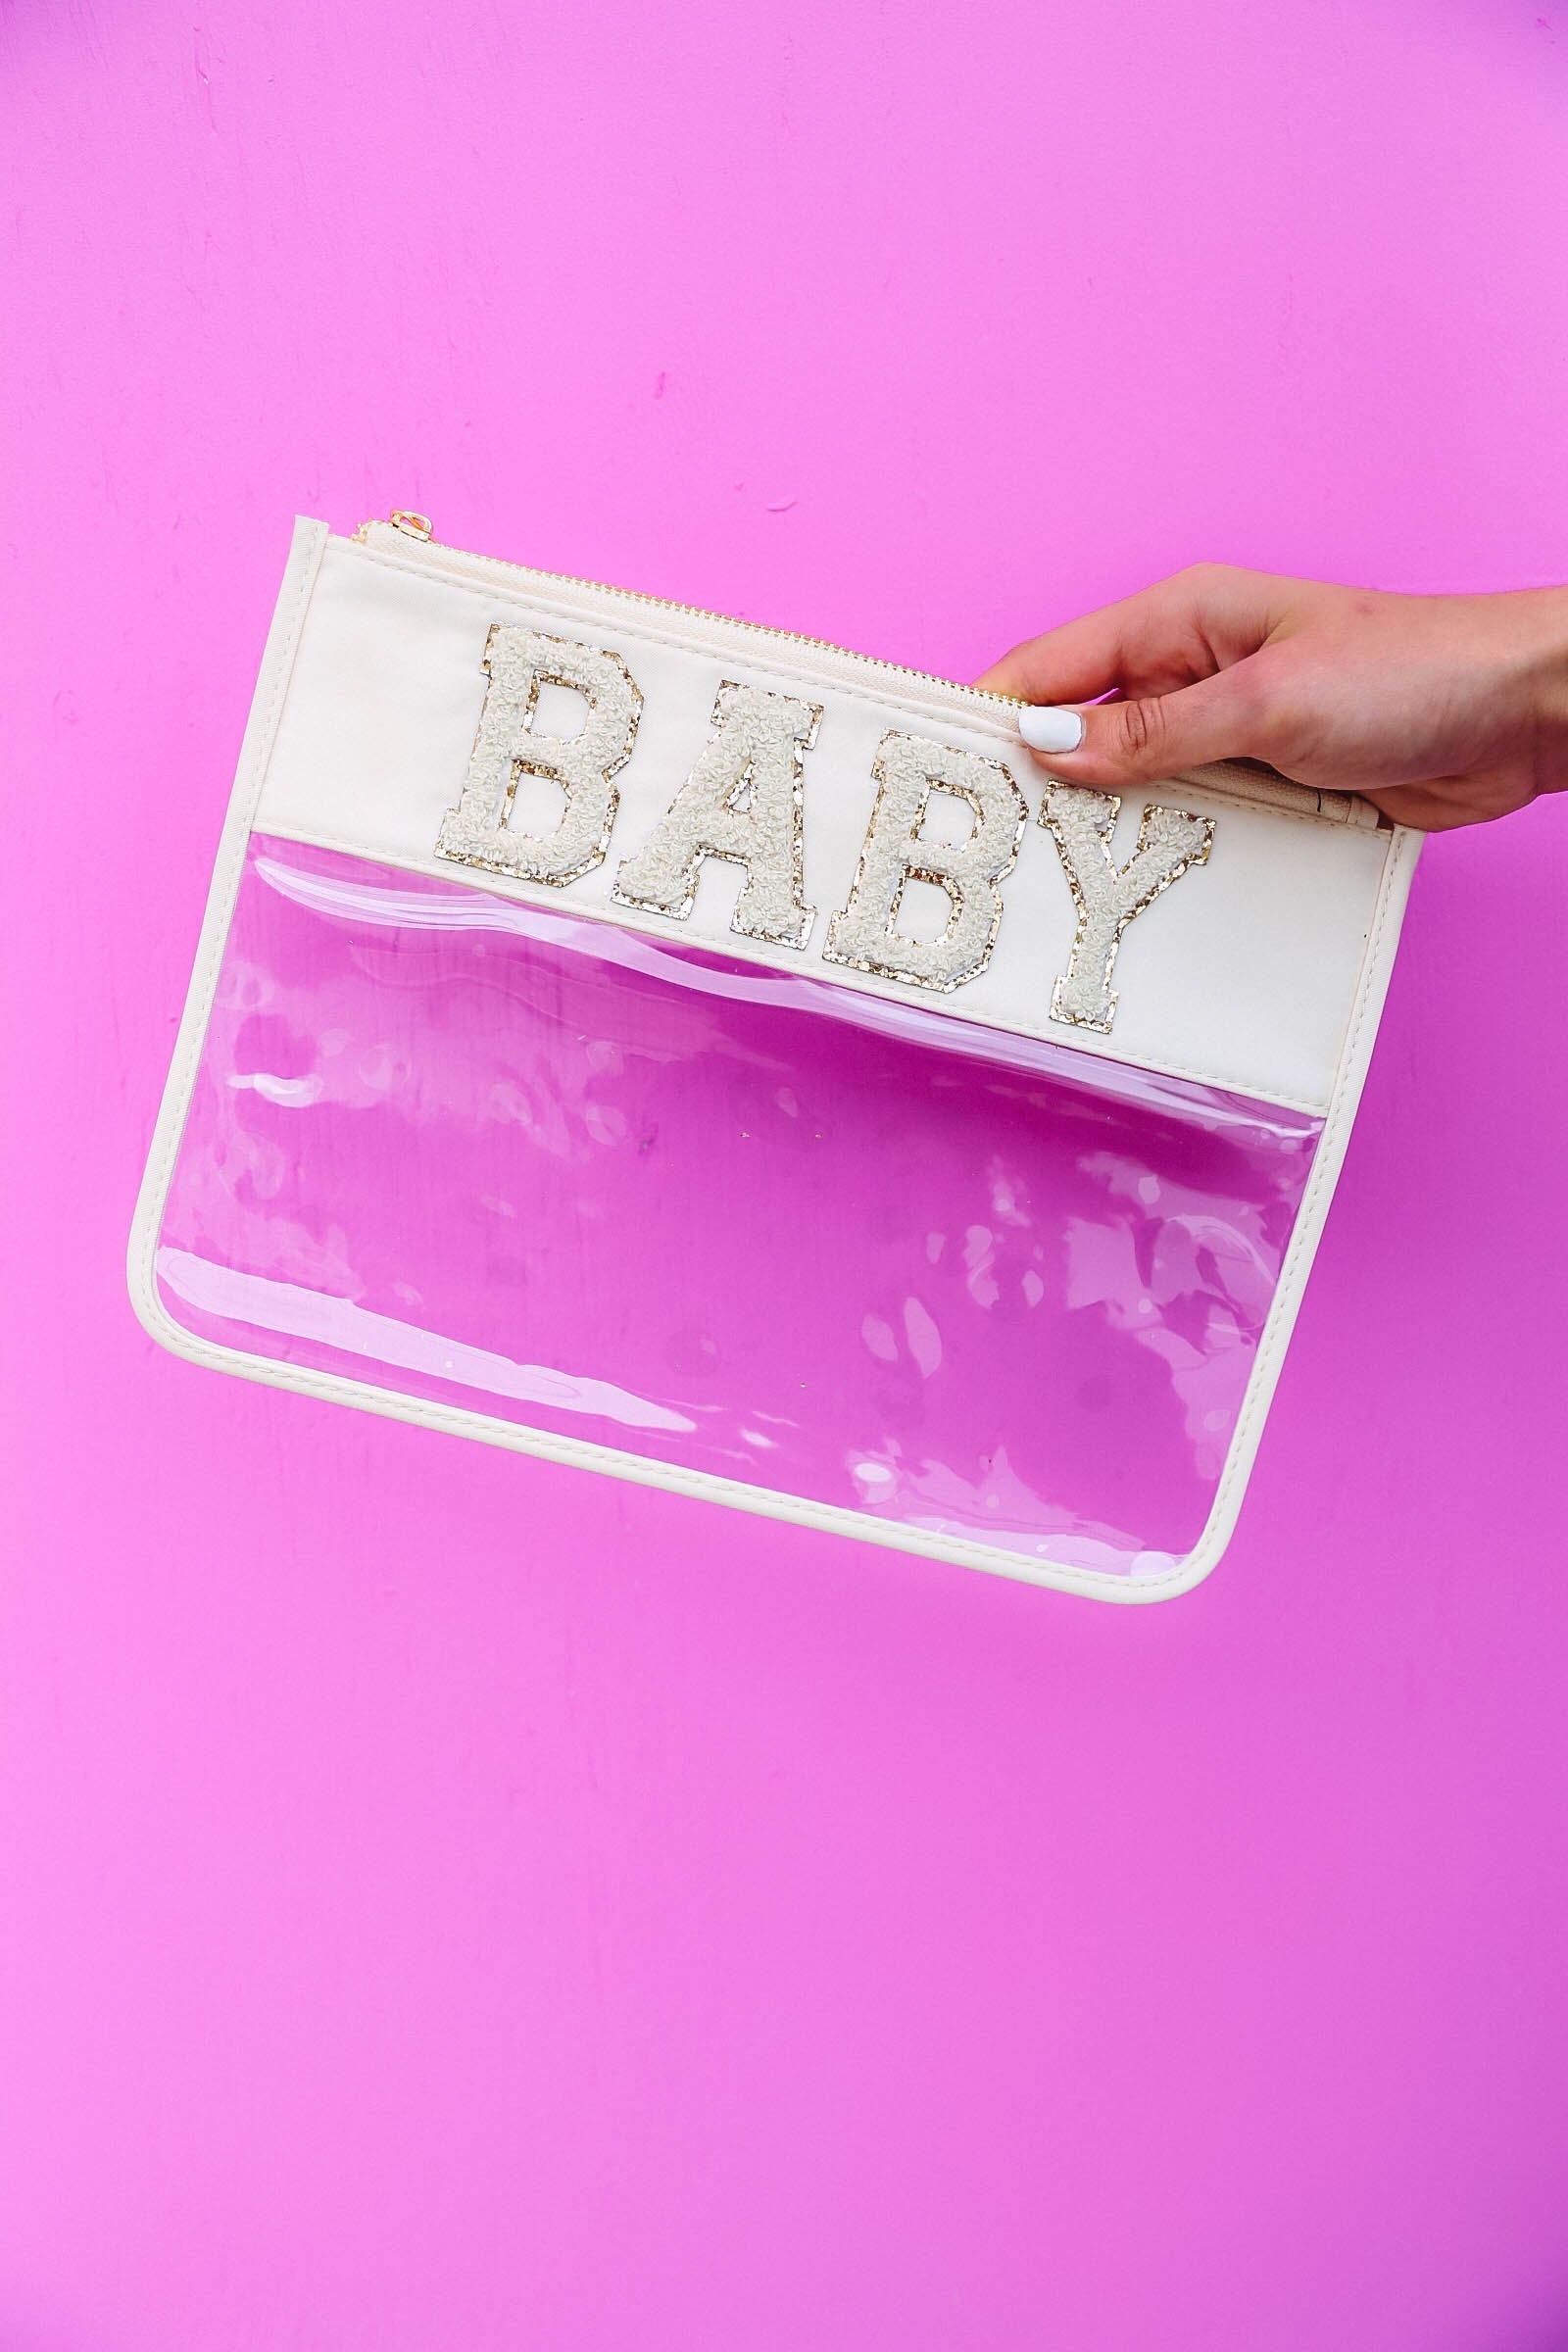 pink background with hand holding clear nylon bag with cream trim and chenille patches that spell "baby".